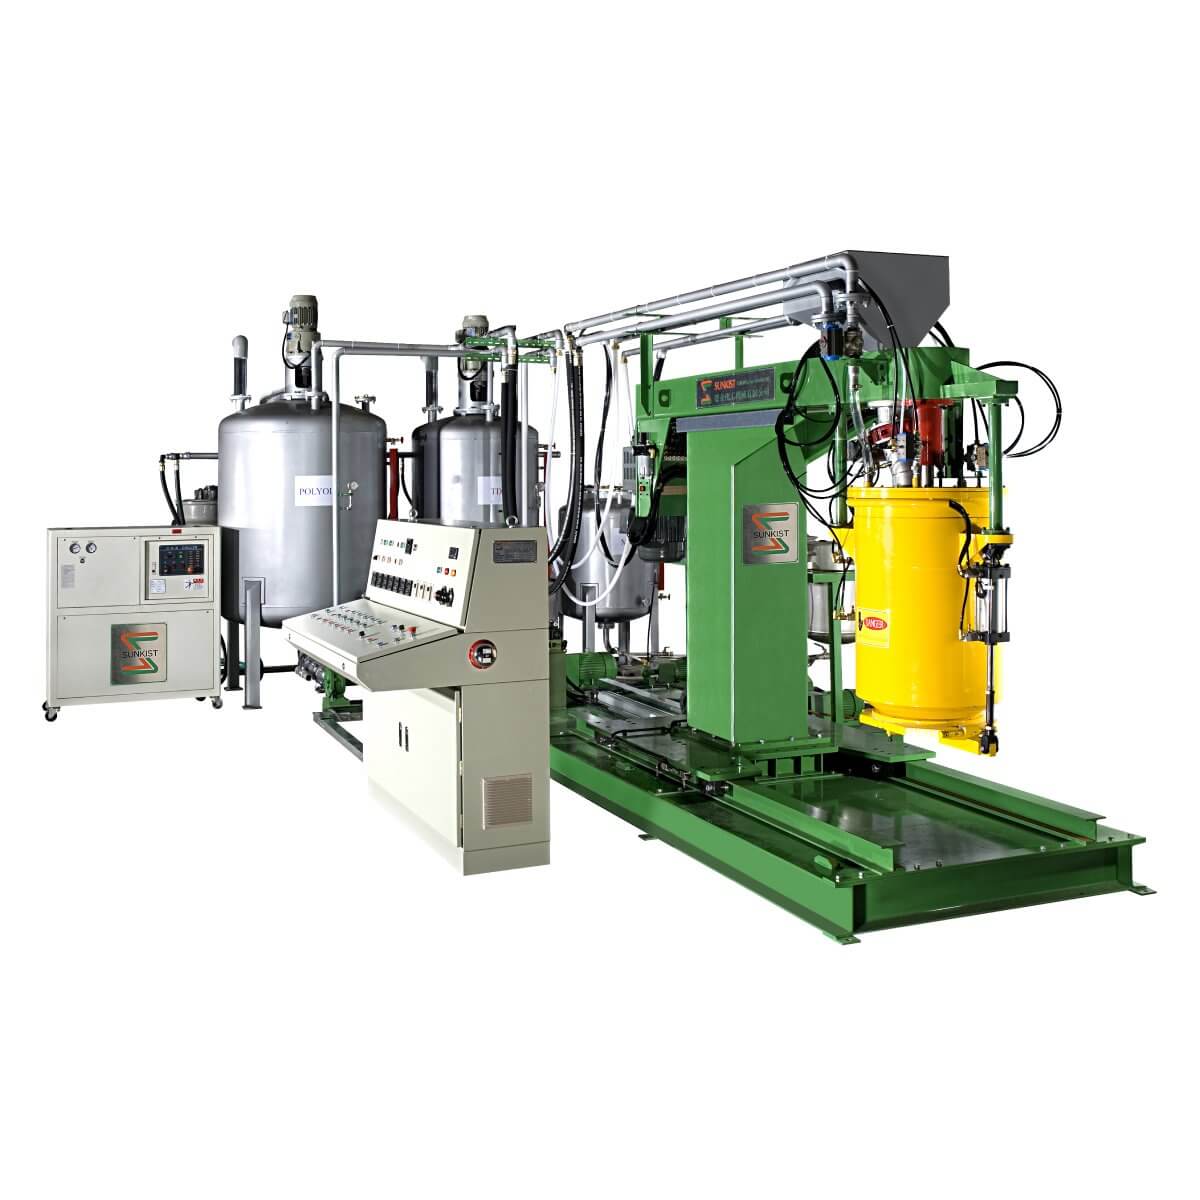 Is A Continuous Foaming Machine Worth The Cost? - Santech Foam